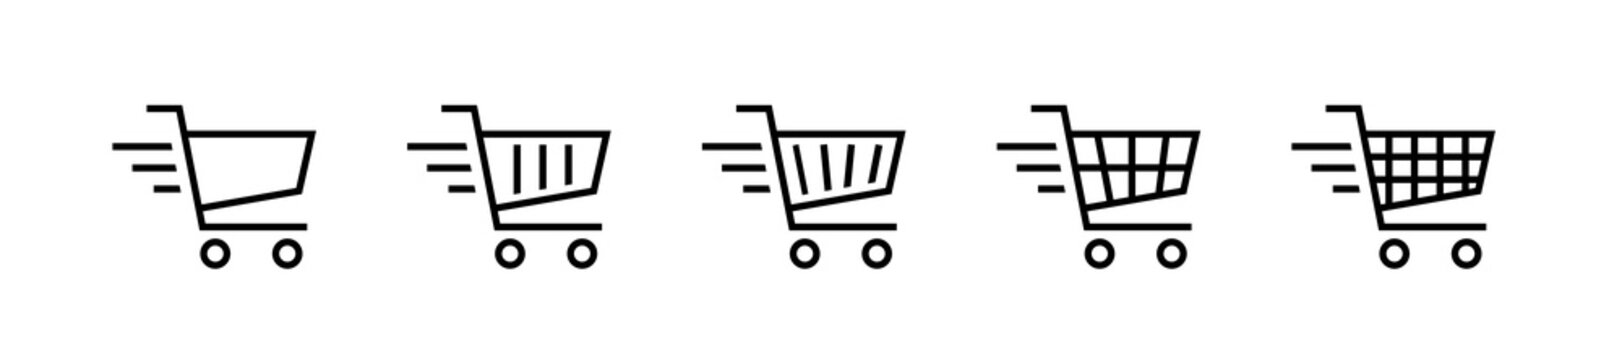 Shopping cart flat vector icon set. Online shopping concept icons. Online store. Vector graphic